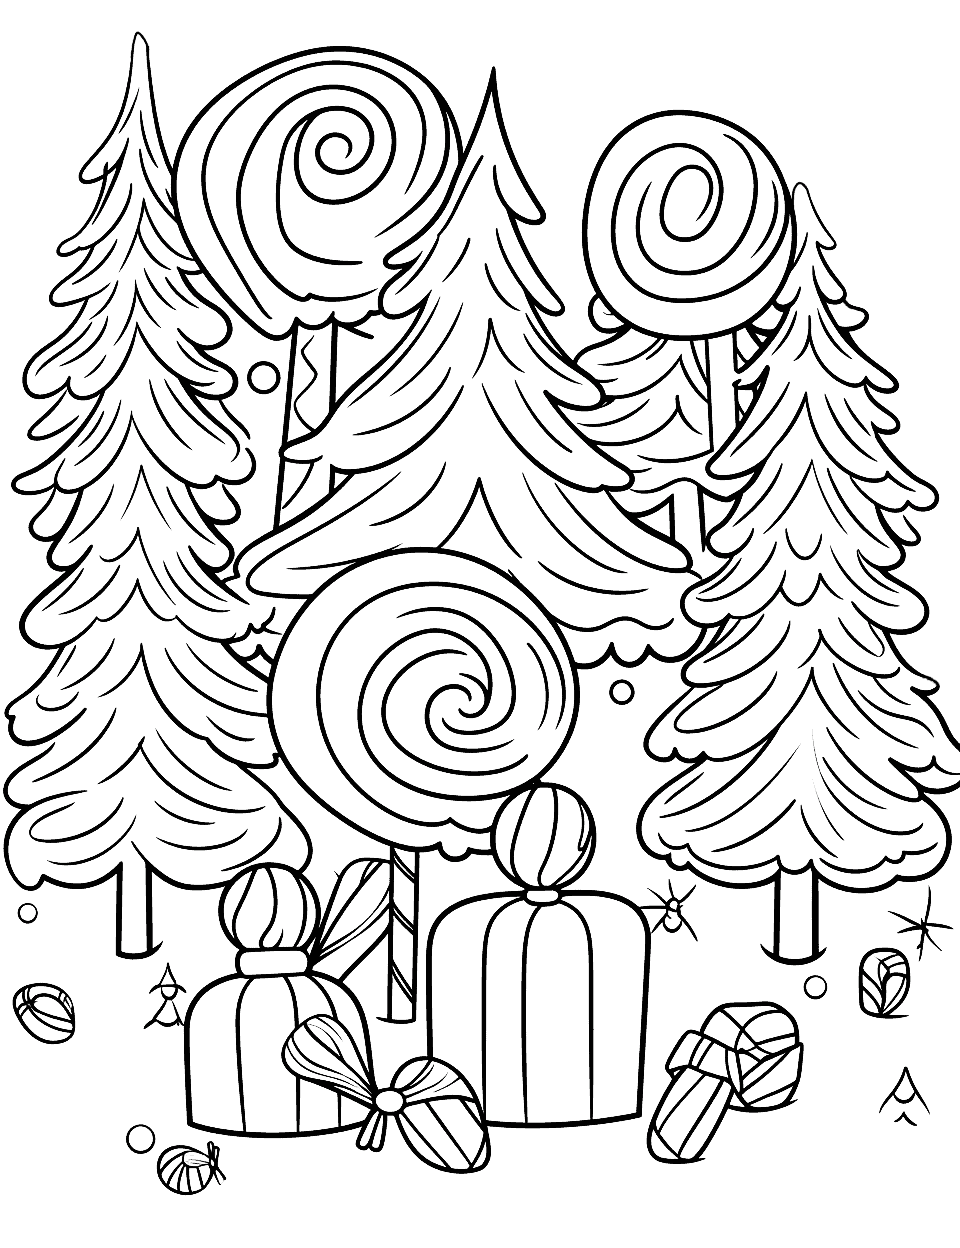 Candy Cane Forest Christmas Coloring Page - A fantasy forest made of candy canes and other sweet treats.